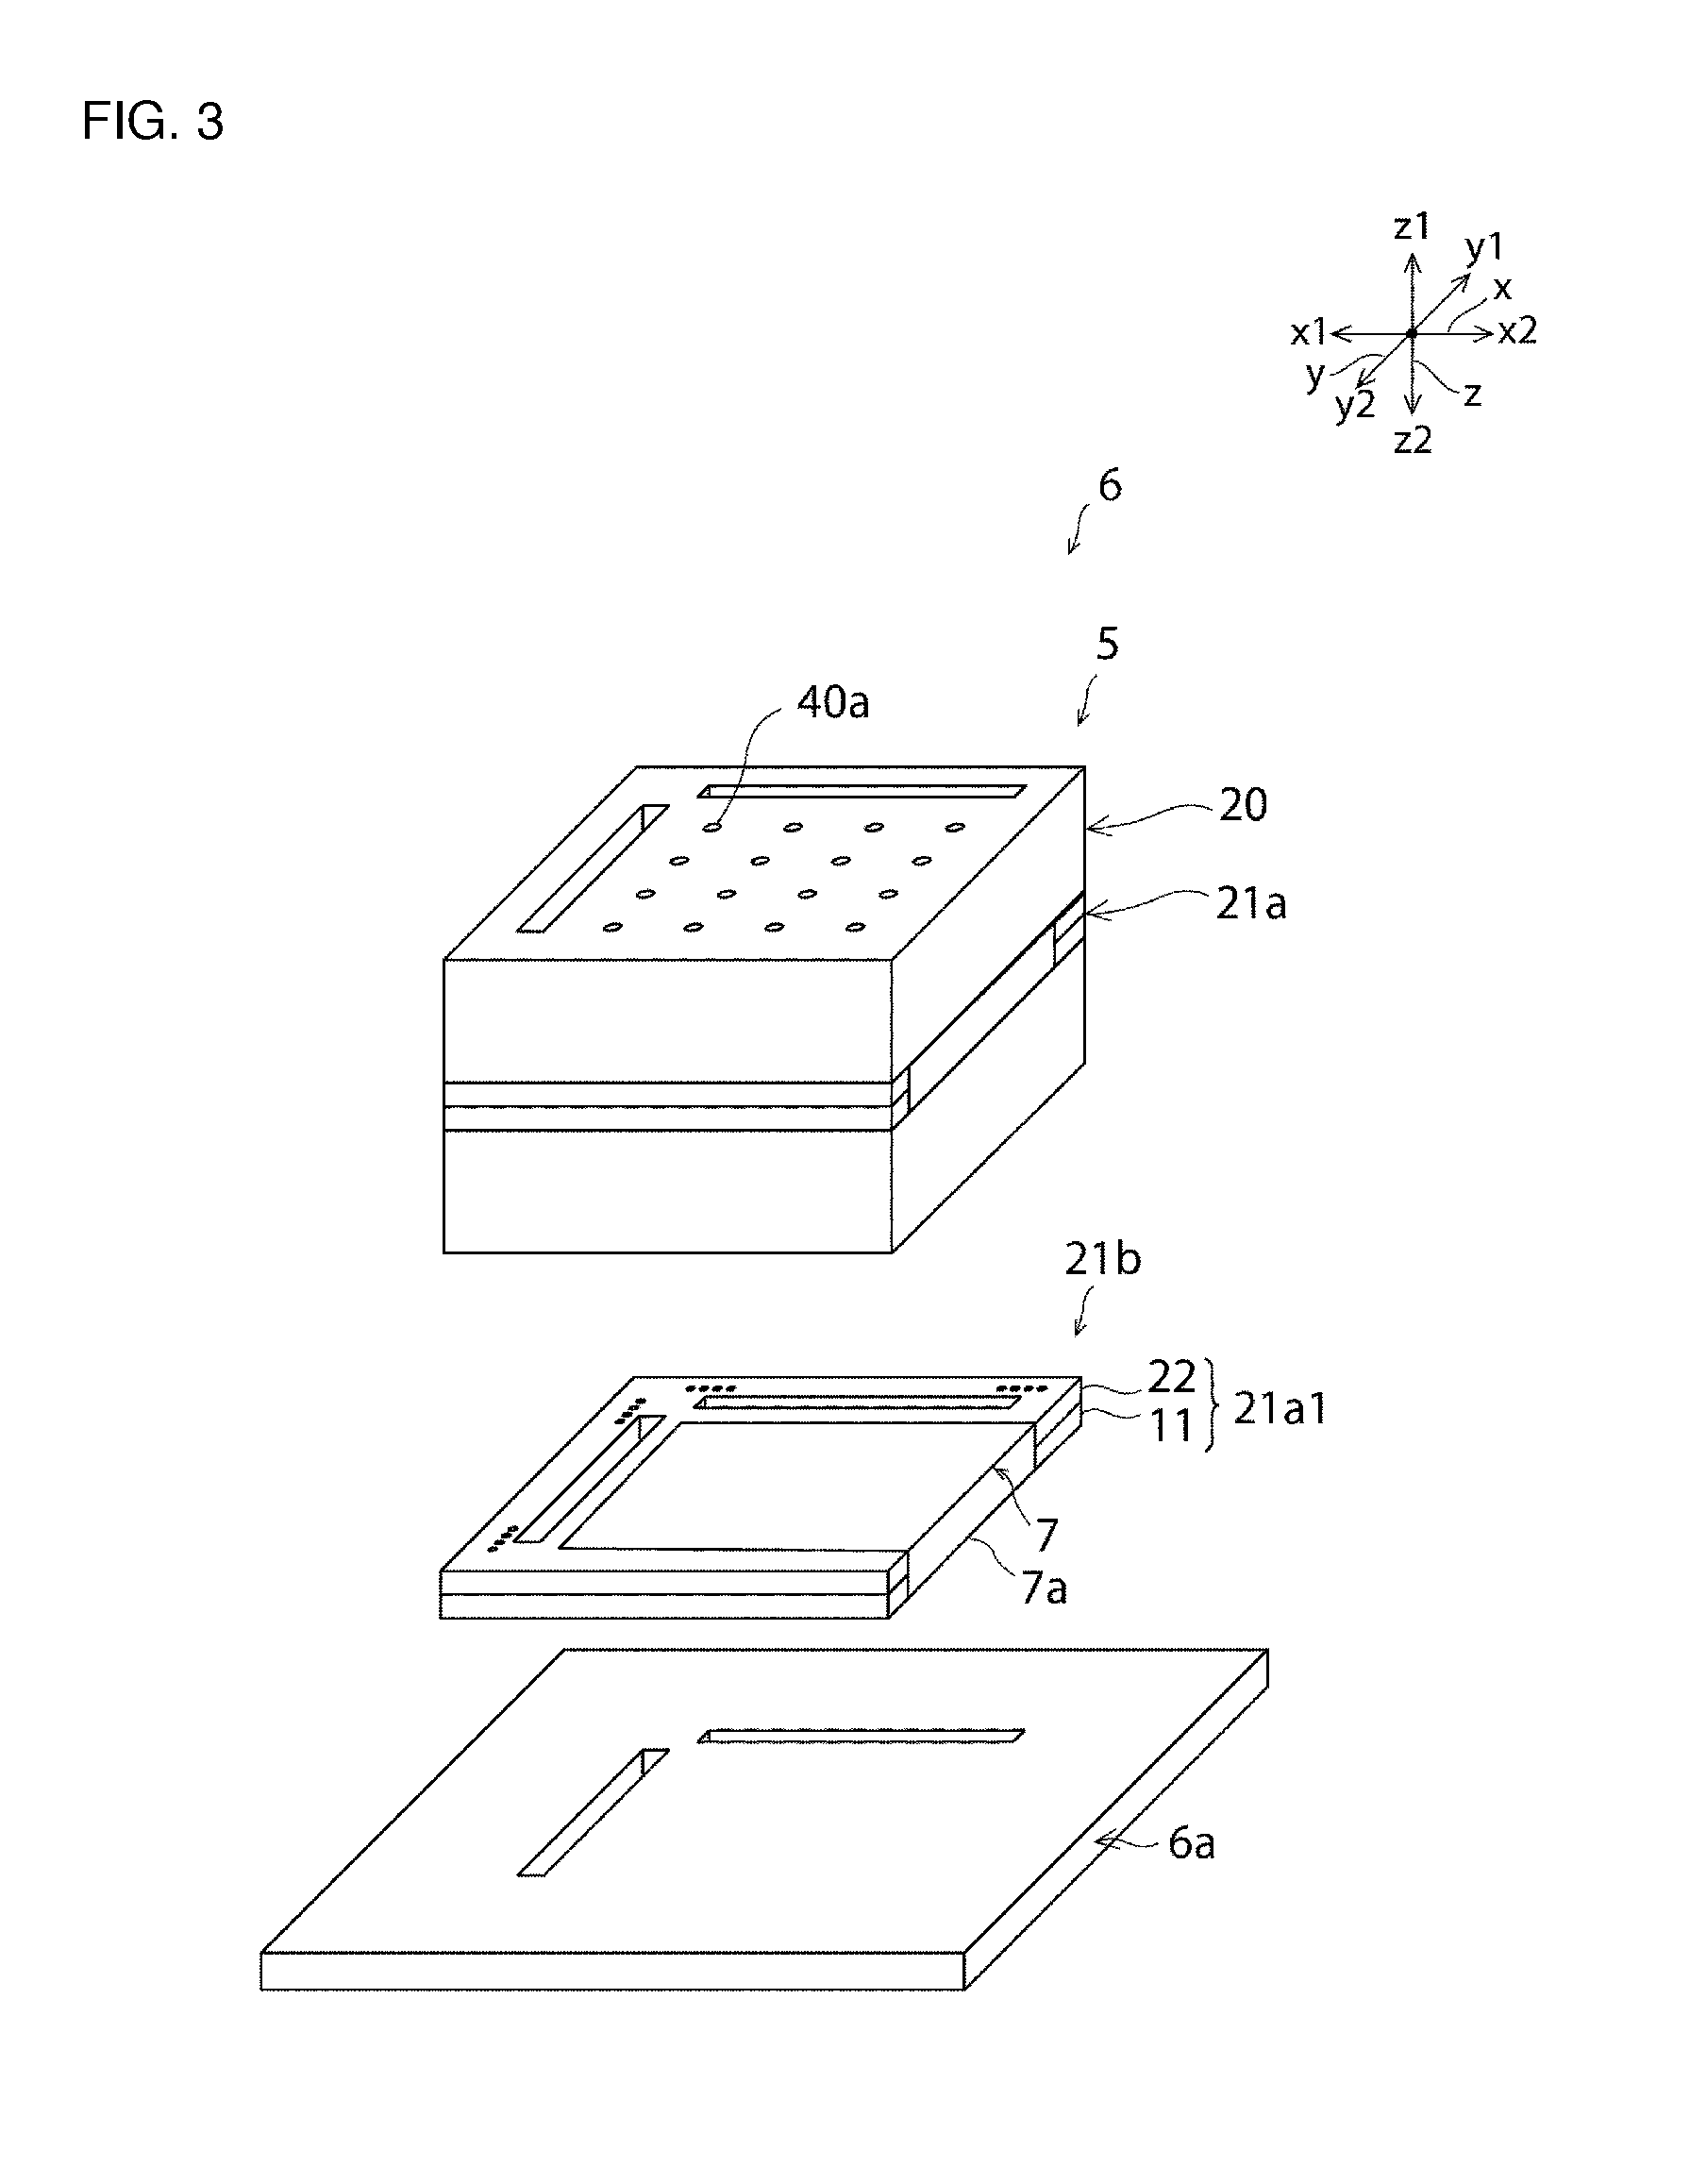 Electrical connection material for solid oxide fuel cell, solid oxide fuel cell, solid oxide fuel cell module, and method for manufacturing solid oxide fuel cell